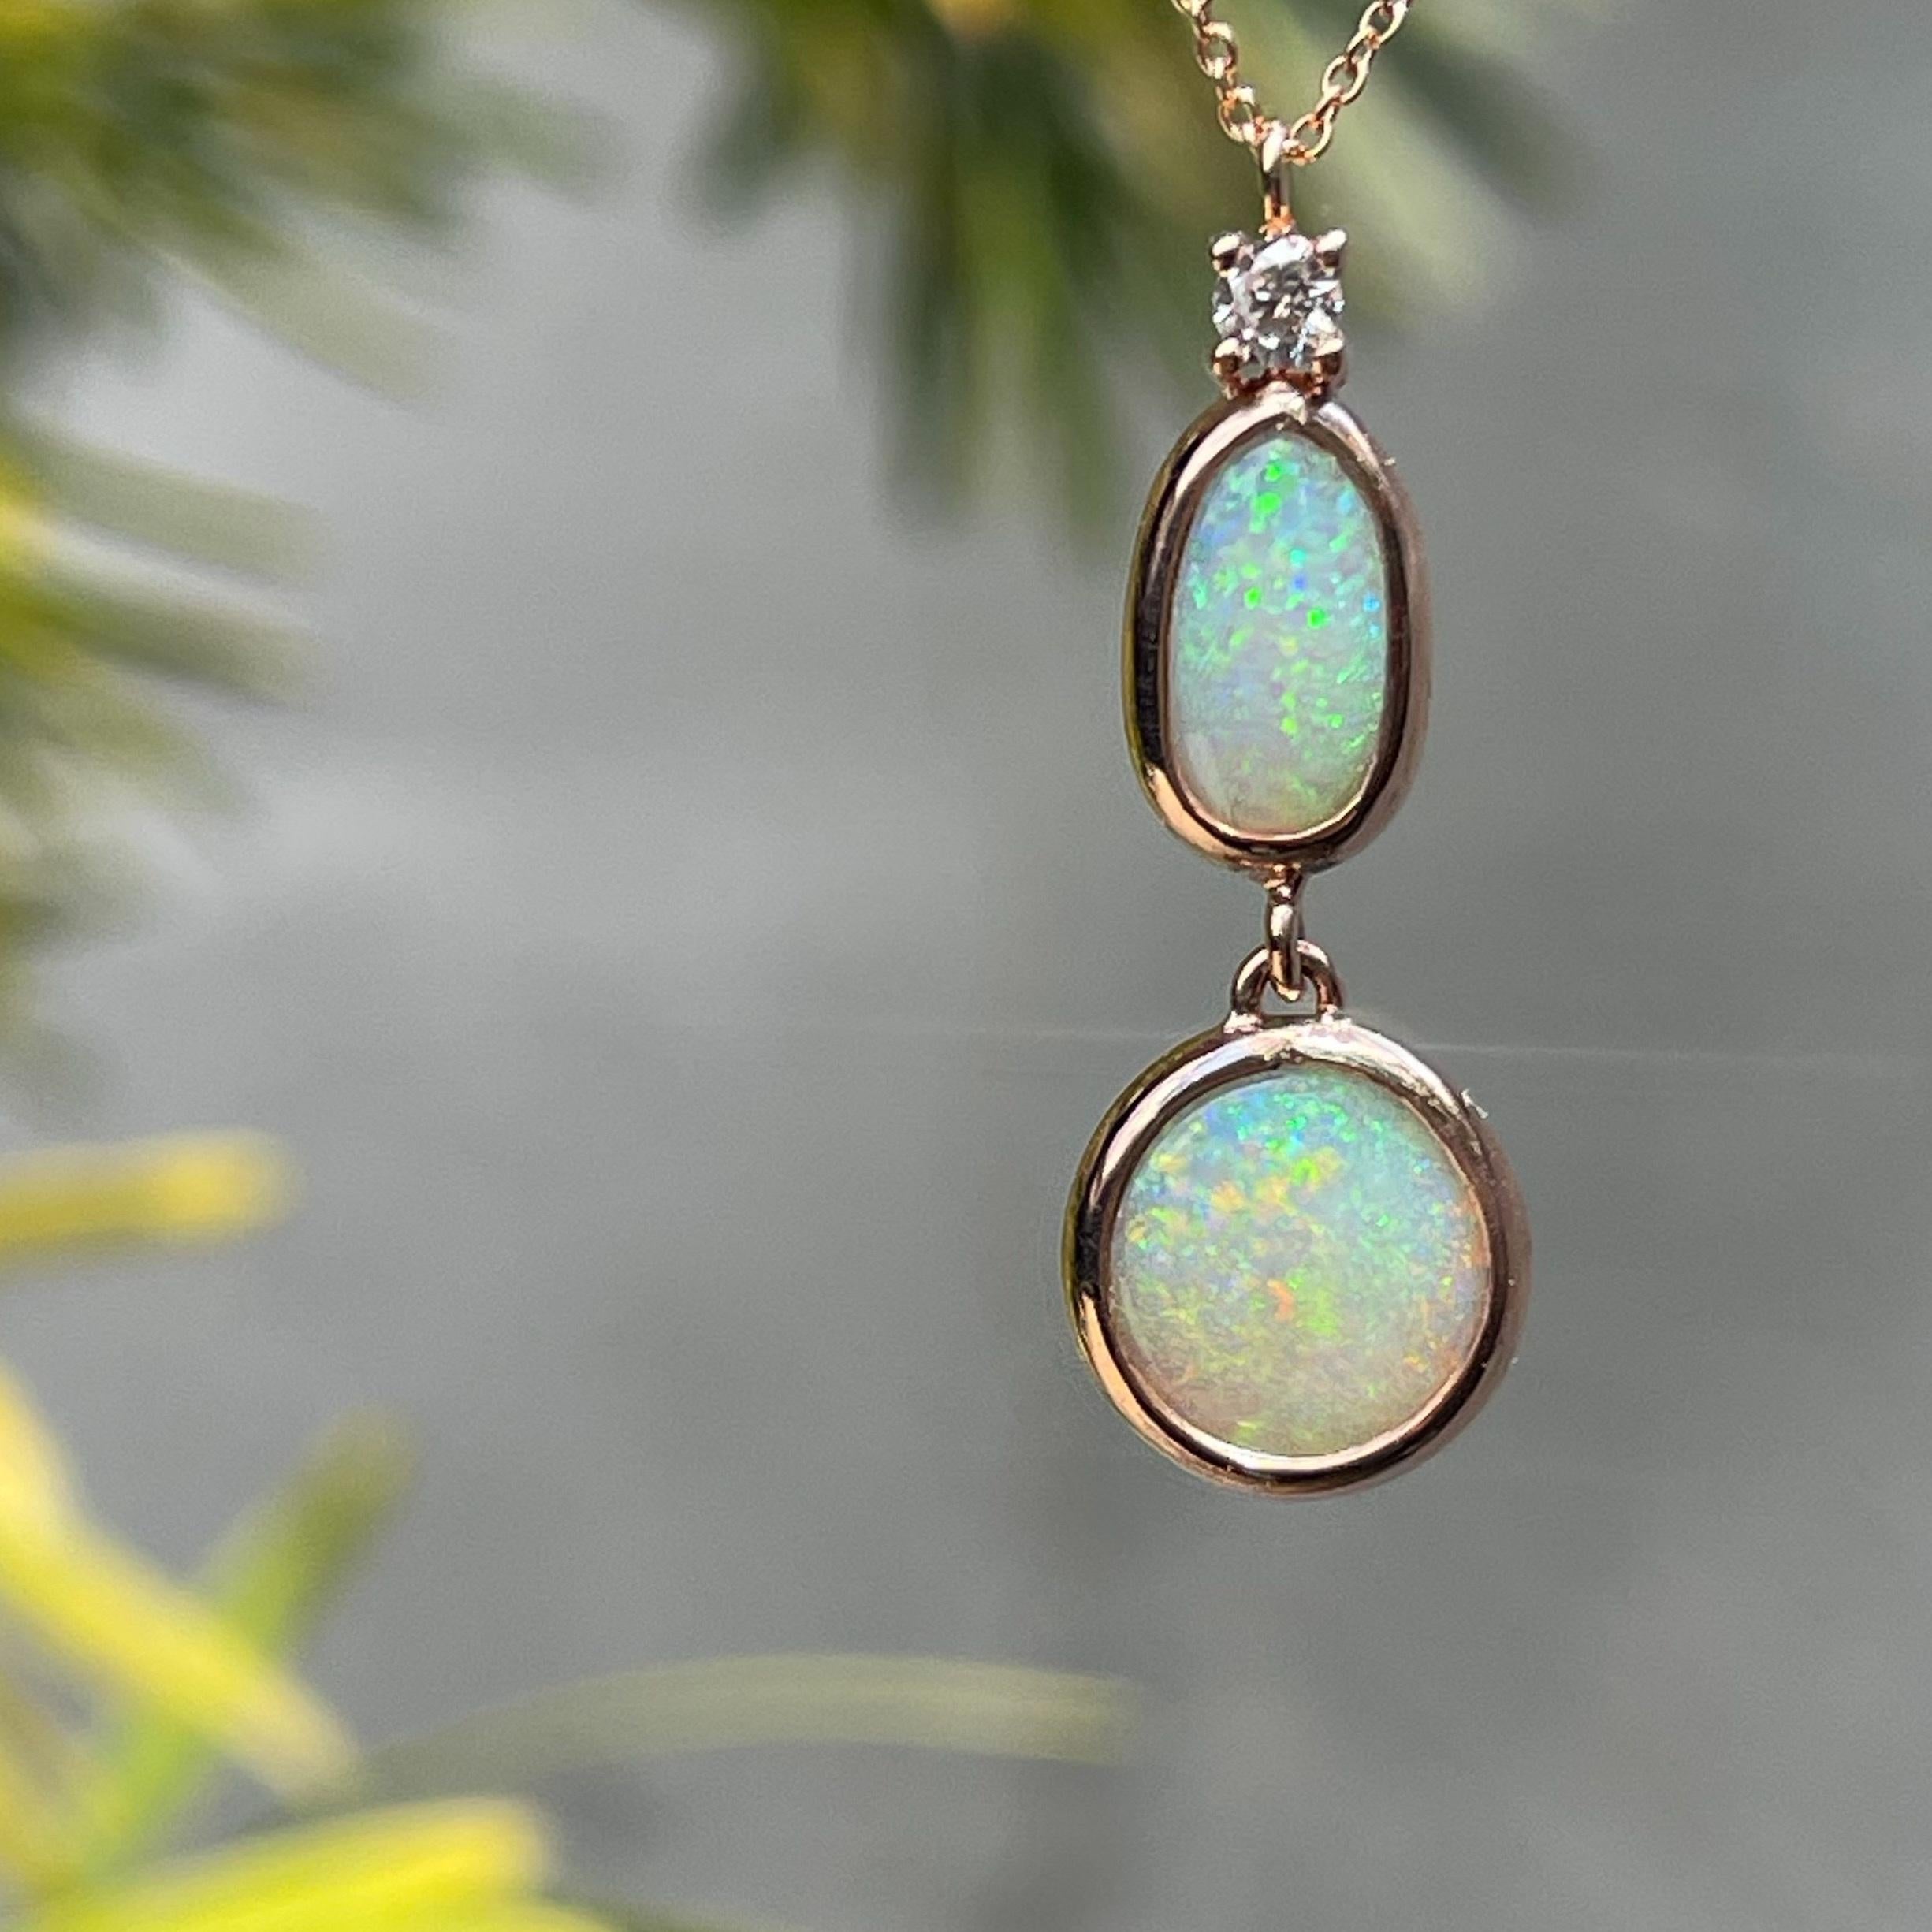 NIXIN Jewelry Cadence Australian Opal Necklace with Diamond Pendant in Rose Gold 1